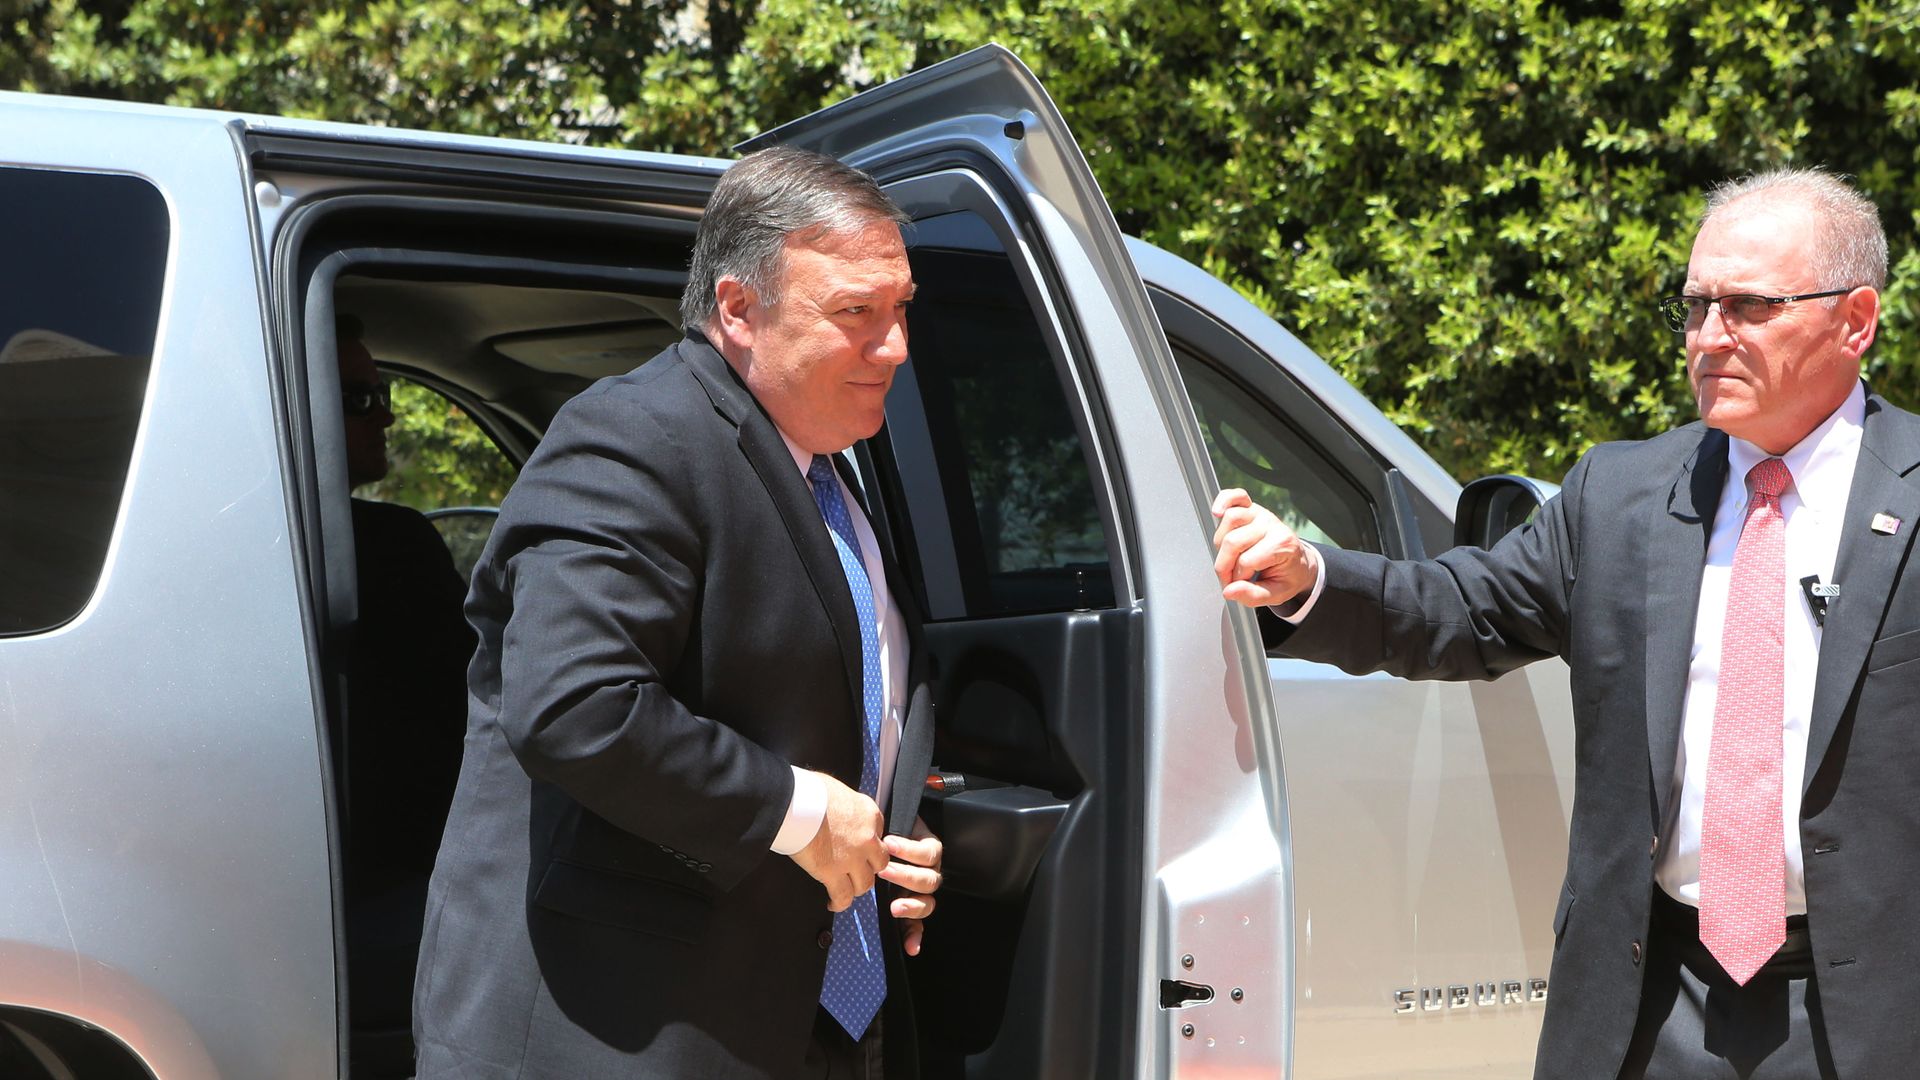 Mike Pompeo pulls his suitcoat together to button it as he steps out of a silver car.